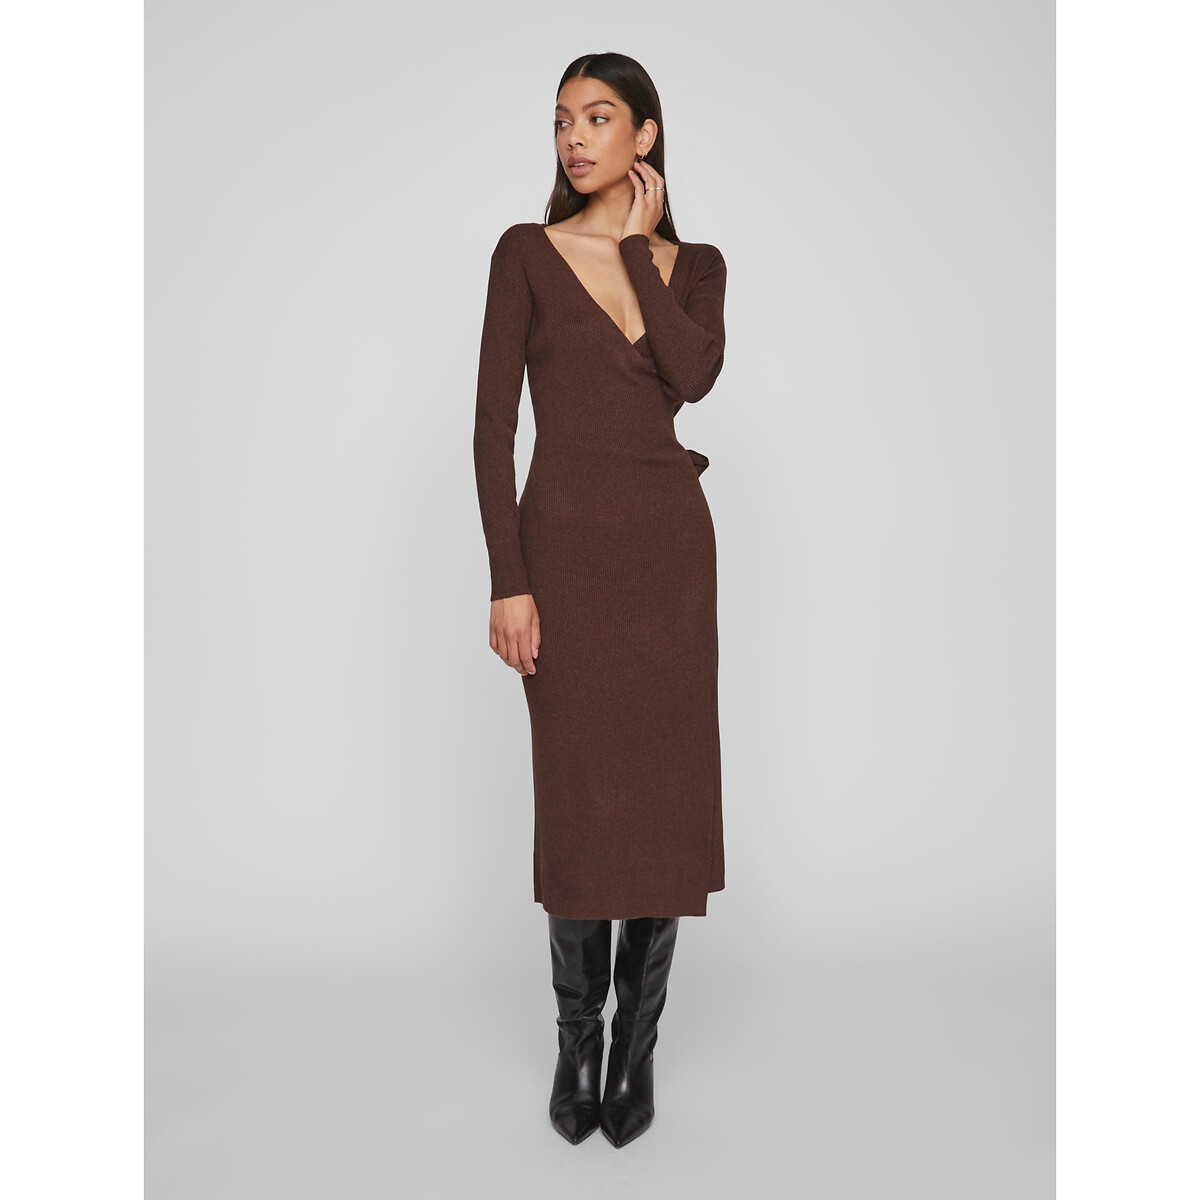 Wrapover Jumper Dress with Long Sleeves